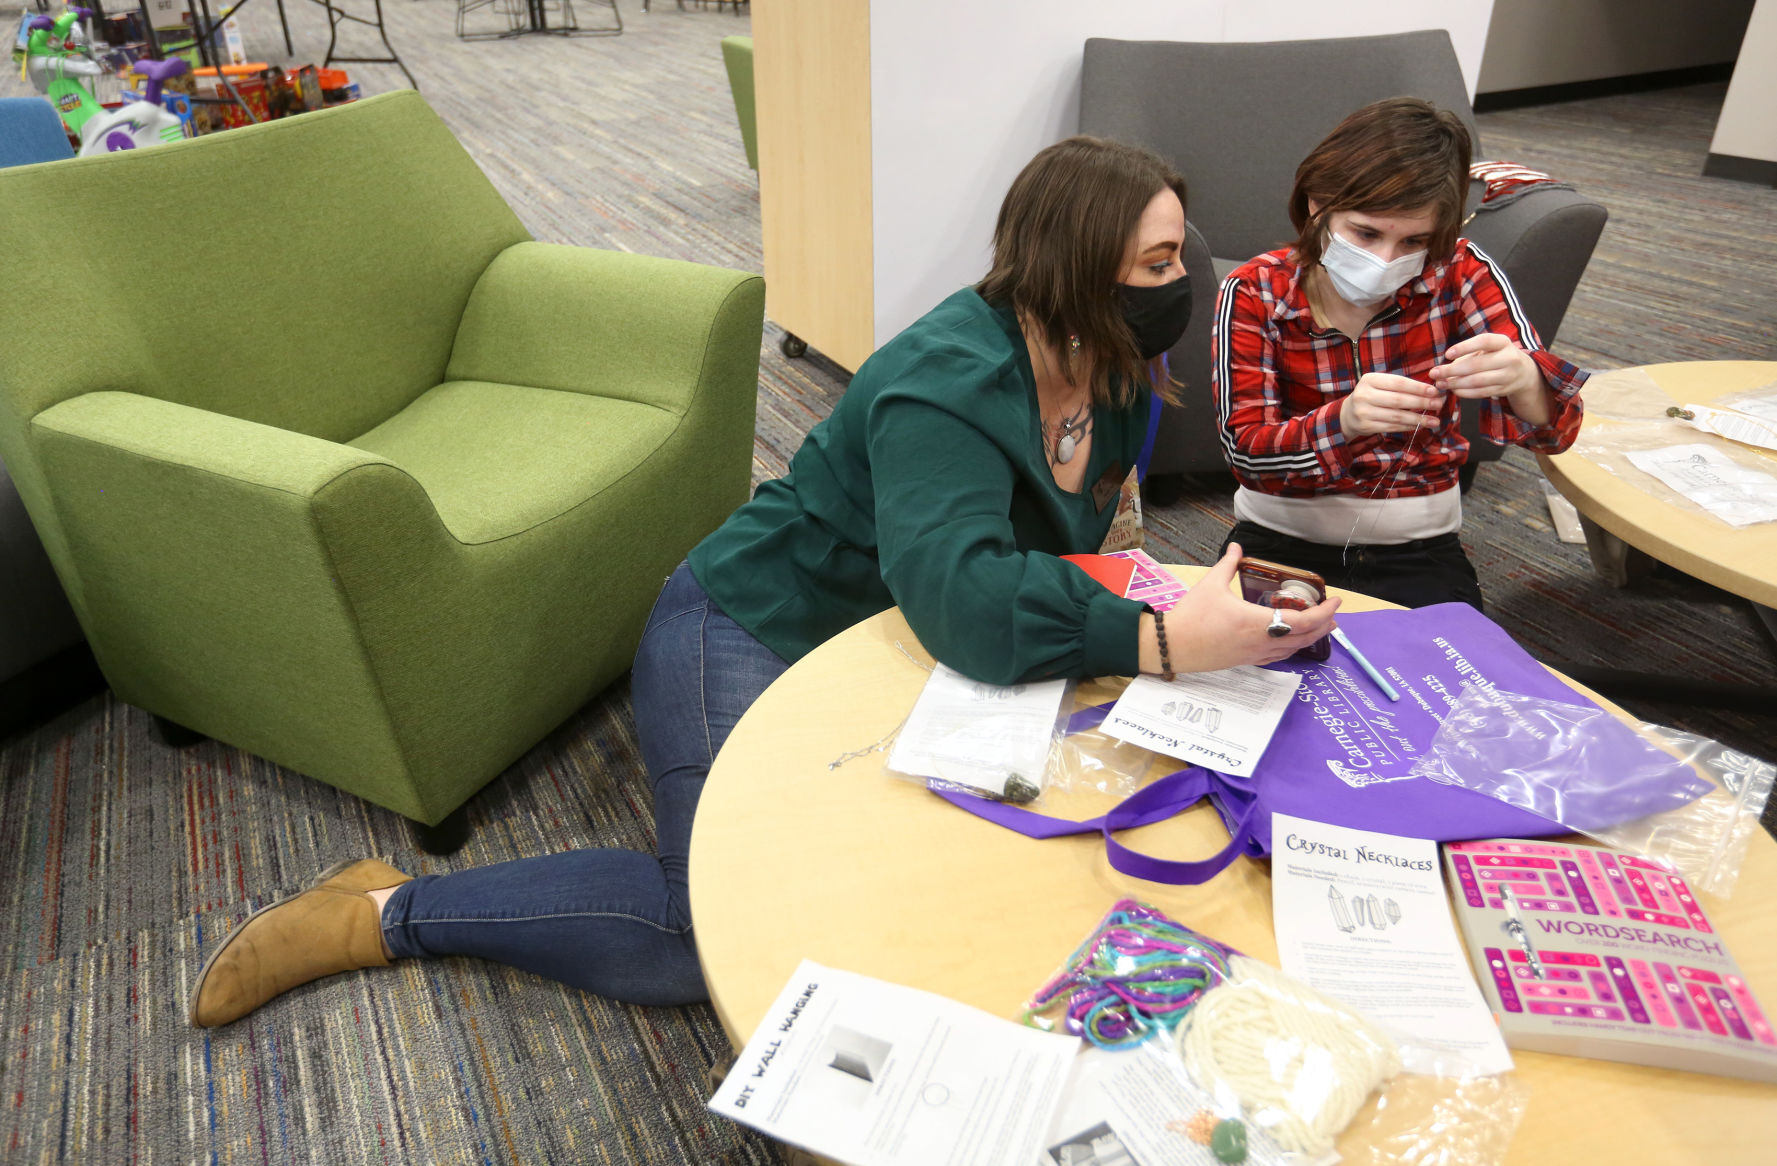 Heidi Zull (left), senior site supervisor at Multicultural Family Center, and Toby Eagles, 16, of Dubuque, work on a craft during teen night at the center in Dubuque on Wednesday, Dec. 9, 2020. PHOTO CREDIT: JESSICA REILLY